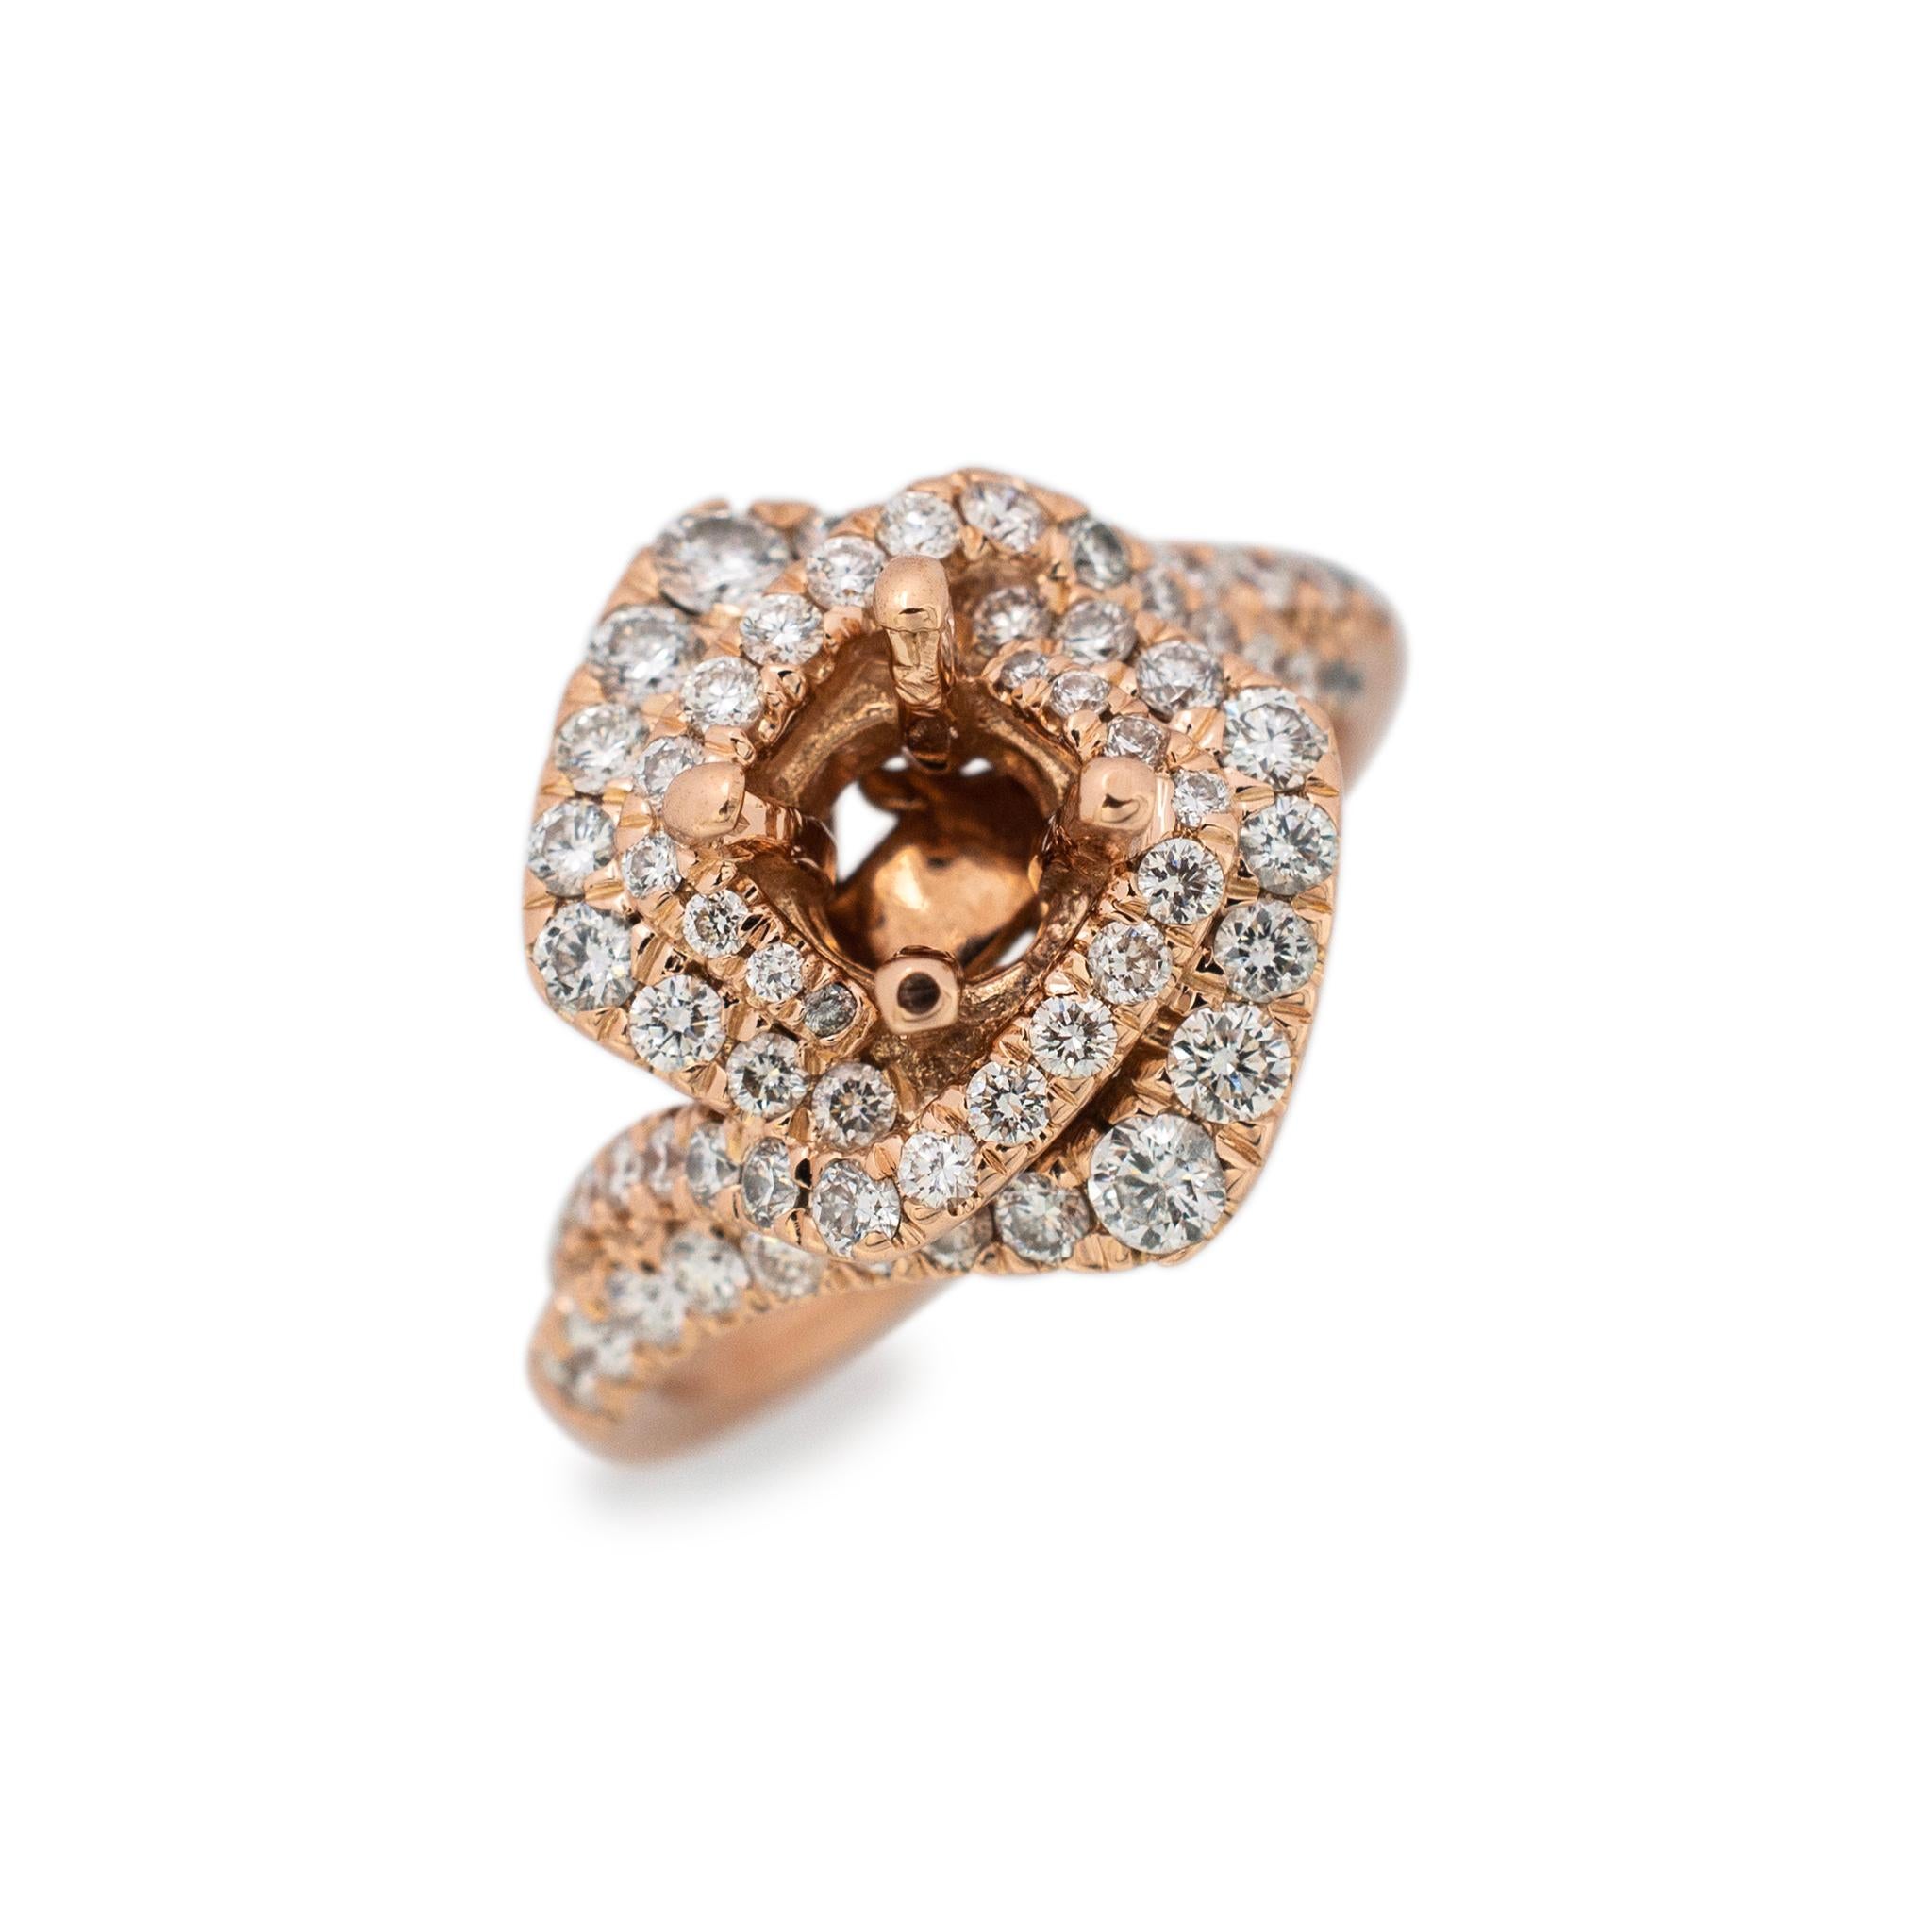 Brand: Gabriel & Co.

Gender: Ladies

Metal Type: 14K Rose Gold

Size: 6.5

Shank Maximum Width: 2.30 mm

Head Measurement: 16.00mm x 14.00mm

Weight: 6.60 grams

Ladies 14K rose gold diamond double-halo bypass ring with a half round shank. Engraved